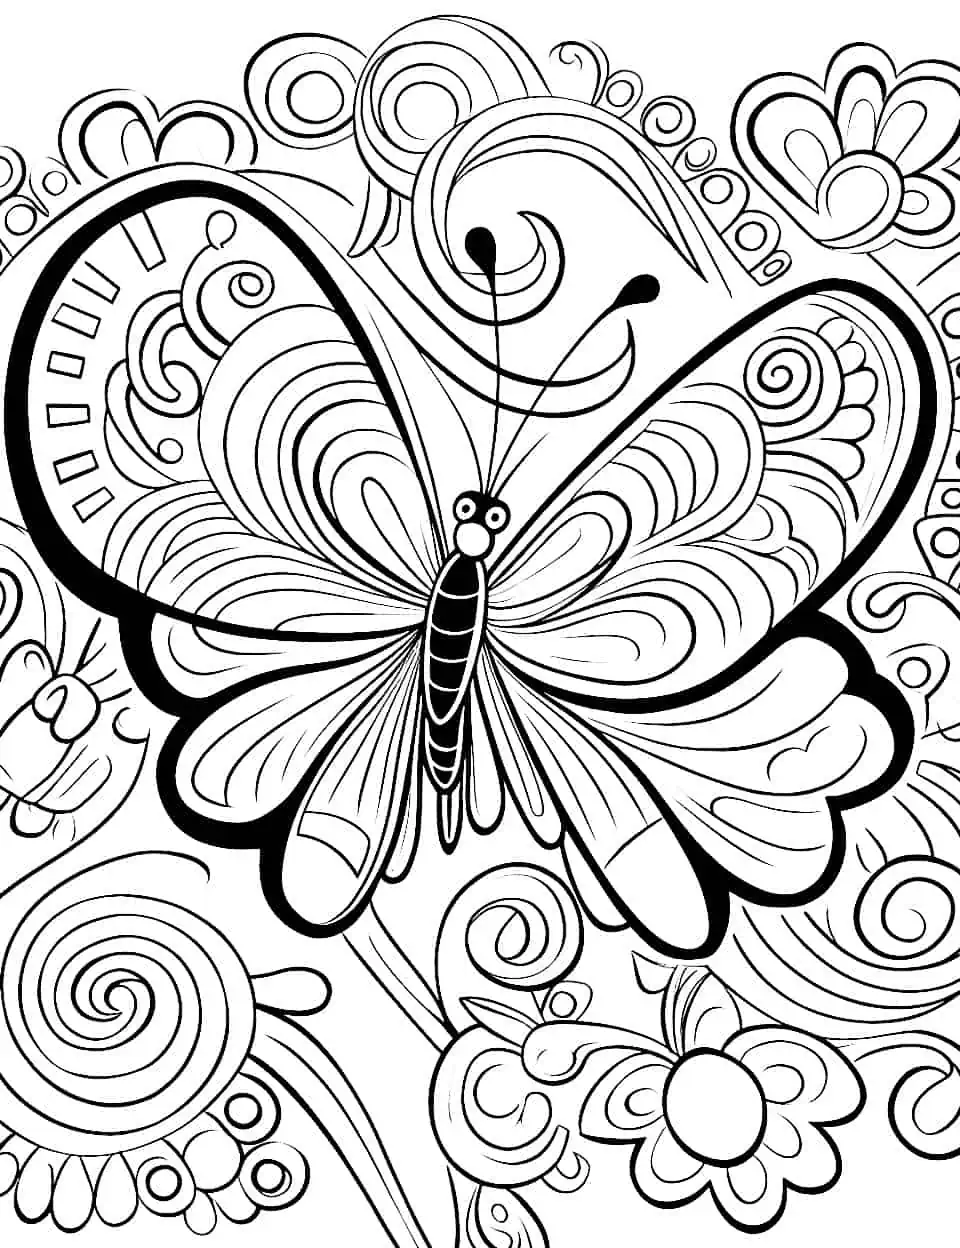 Whimsical Whirlwind Butterfly Coloring Page - A coloring page showcasing butterflies with swirling patterns and whimsical details.